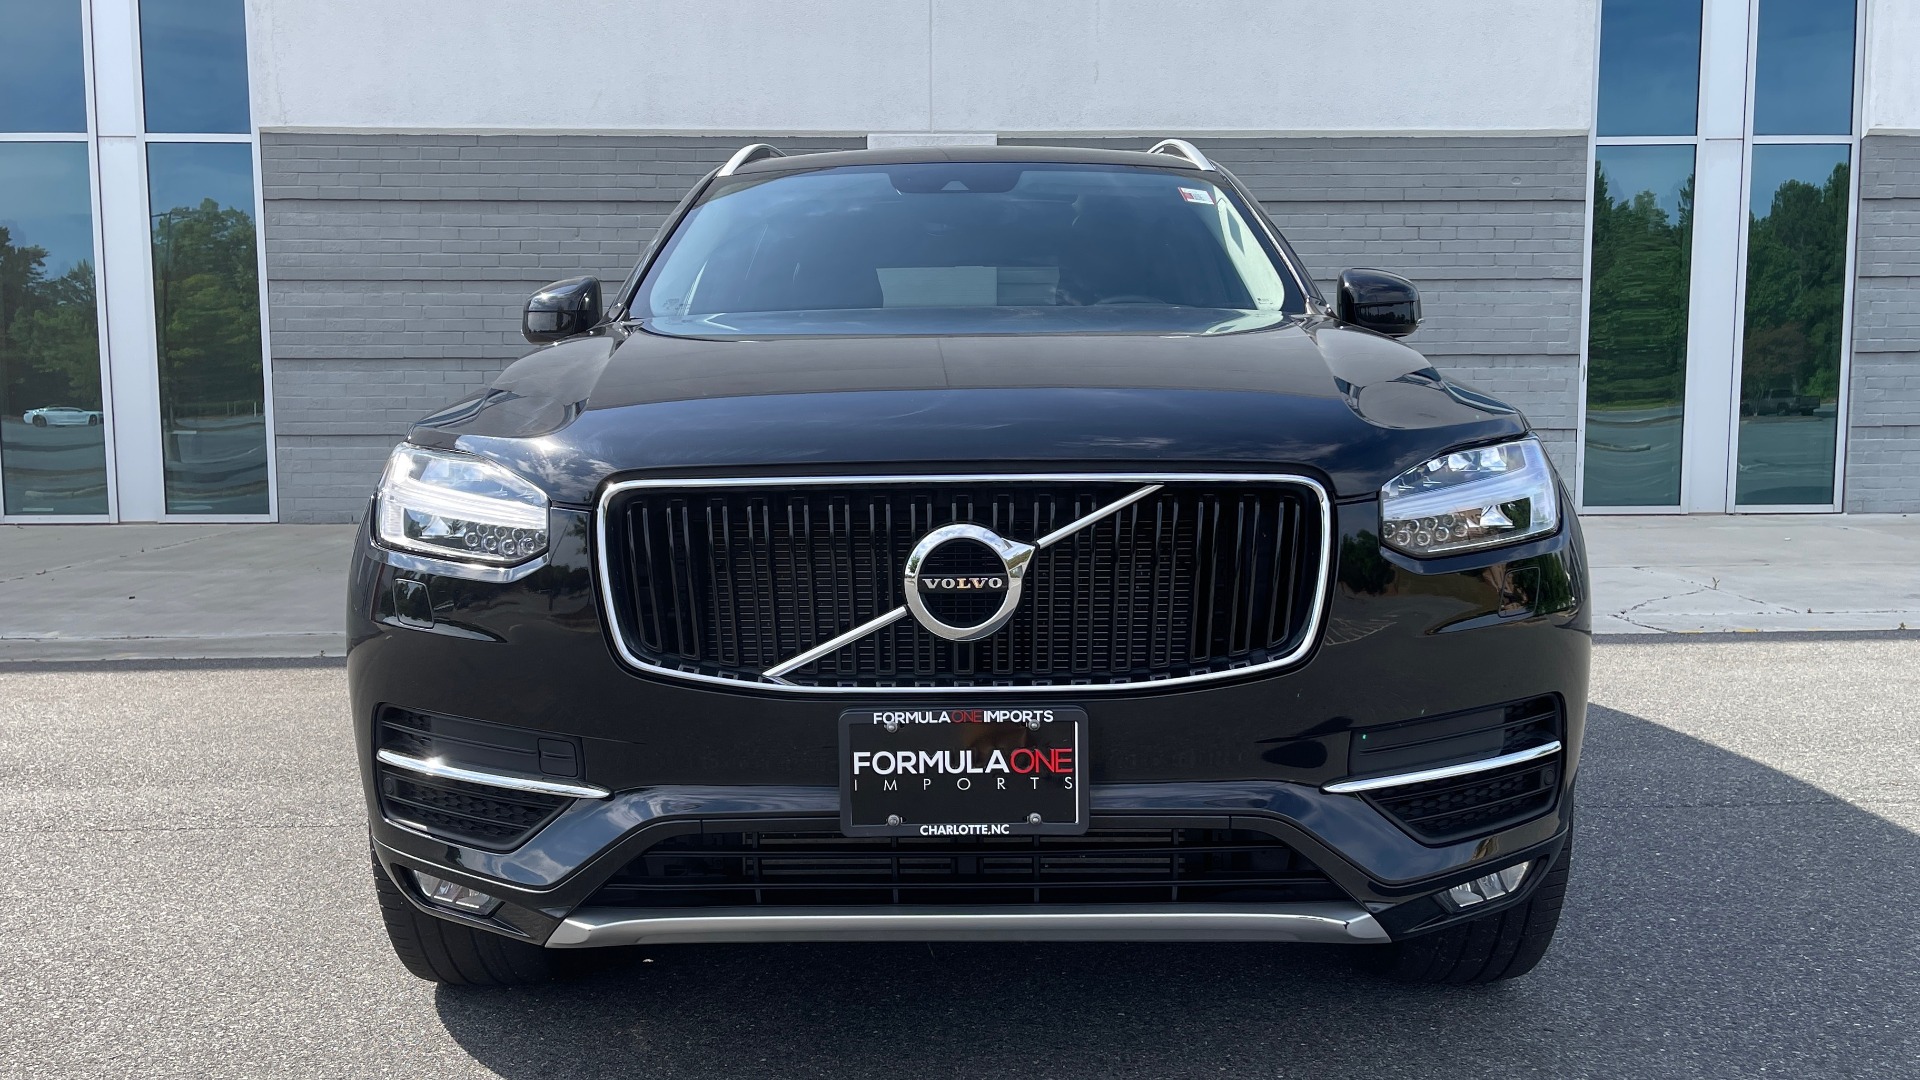 Used 2018 Volvo XC90 T5 AWD MOMENTUM PLUS / NAV / SUNROOF / 3-ROW / REARVIEW for sale Sold at Formula Imports in Charlotte NC 28227 11